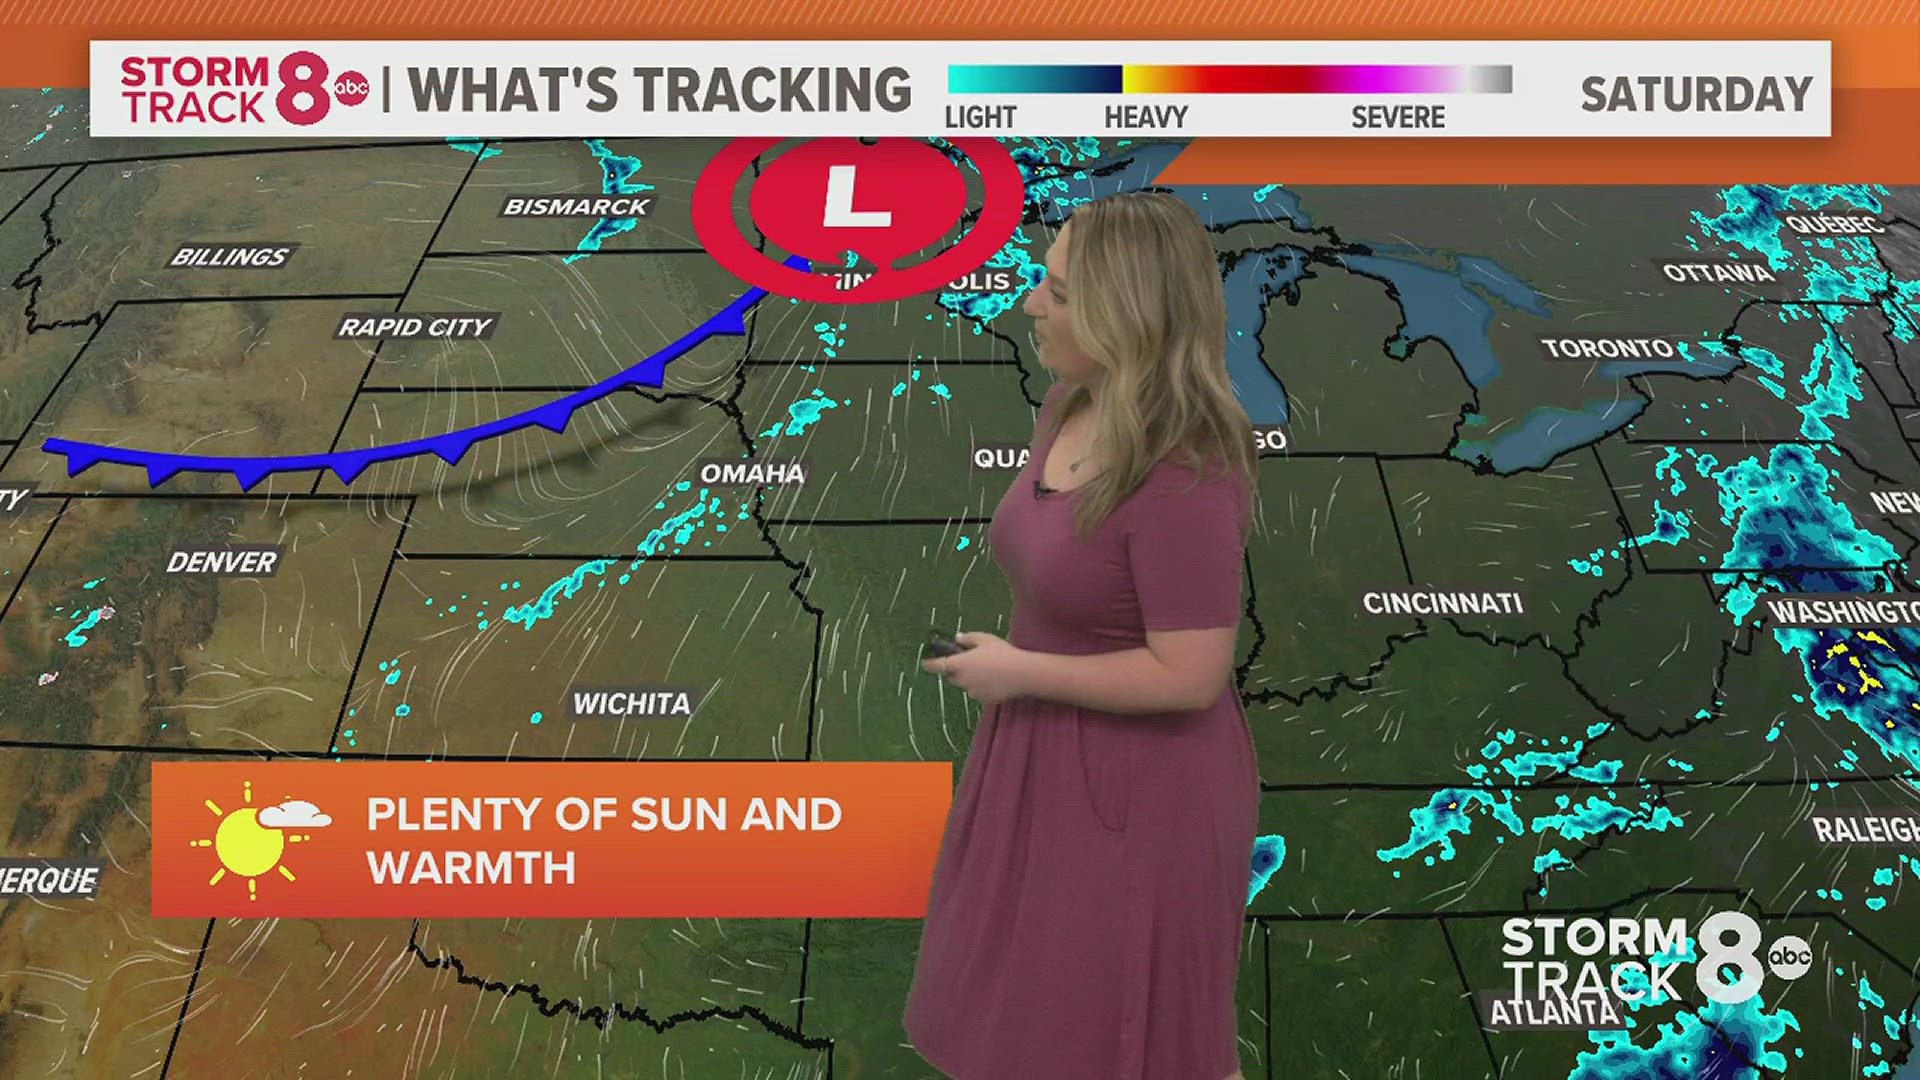 Summer-like warmth through the weekend. Keeping an eye on severe storms for Tuesday.